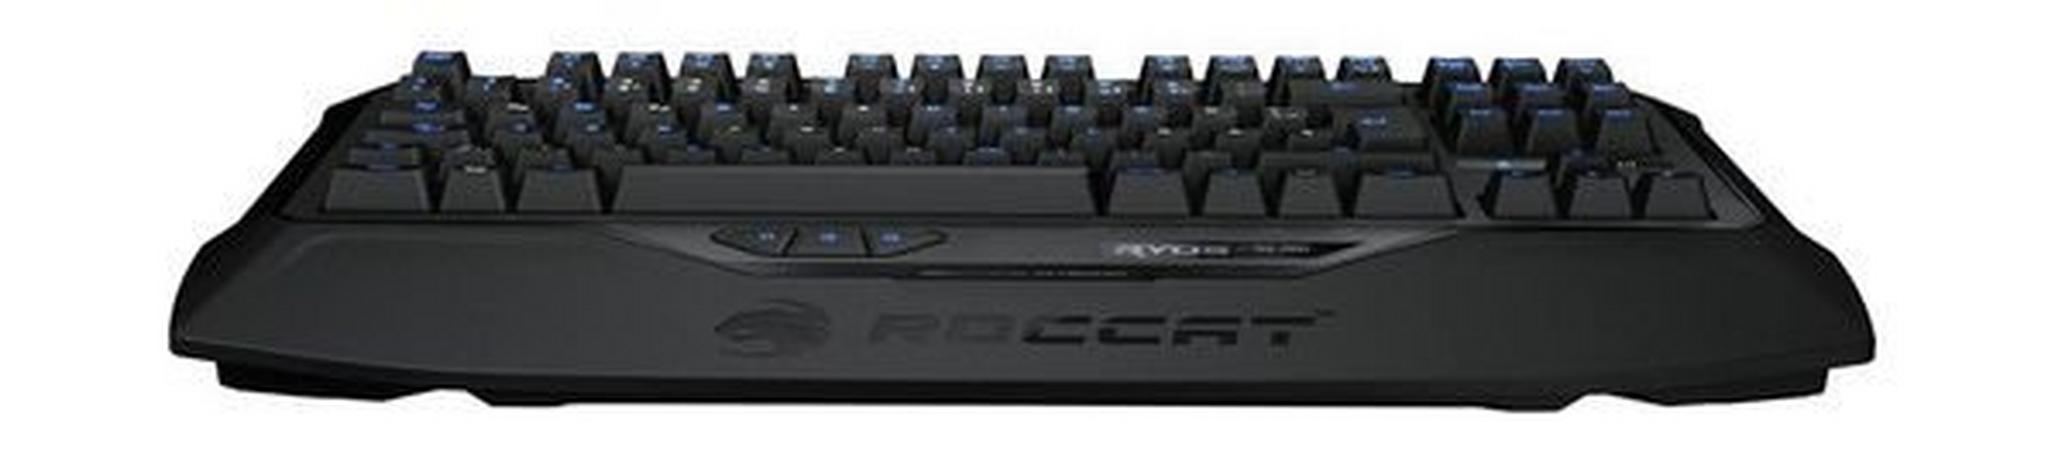 Roccat ROC-12-851-BN Ryos Wired MK Pro Mechanical Backlit Gaming Keyboard - Brown Key Switch